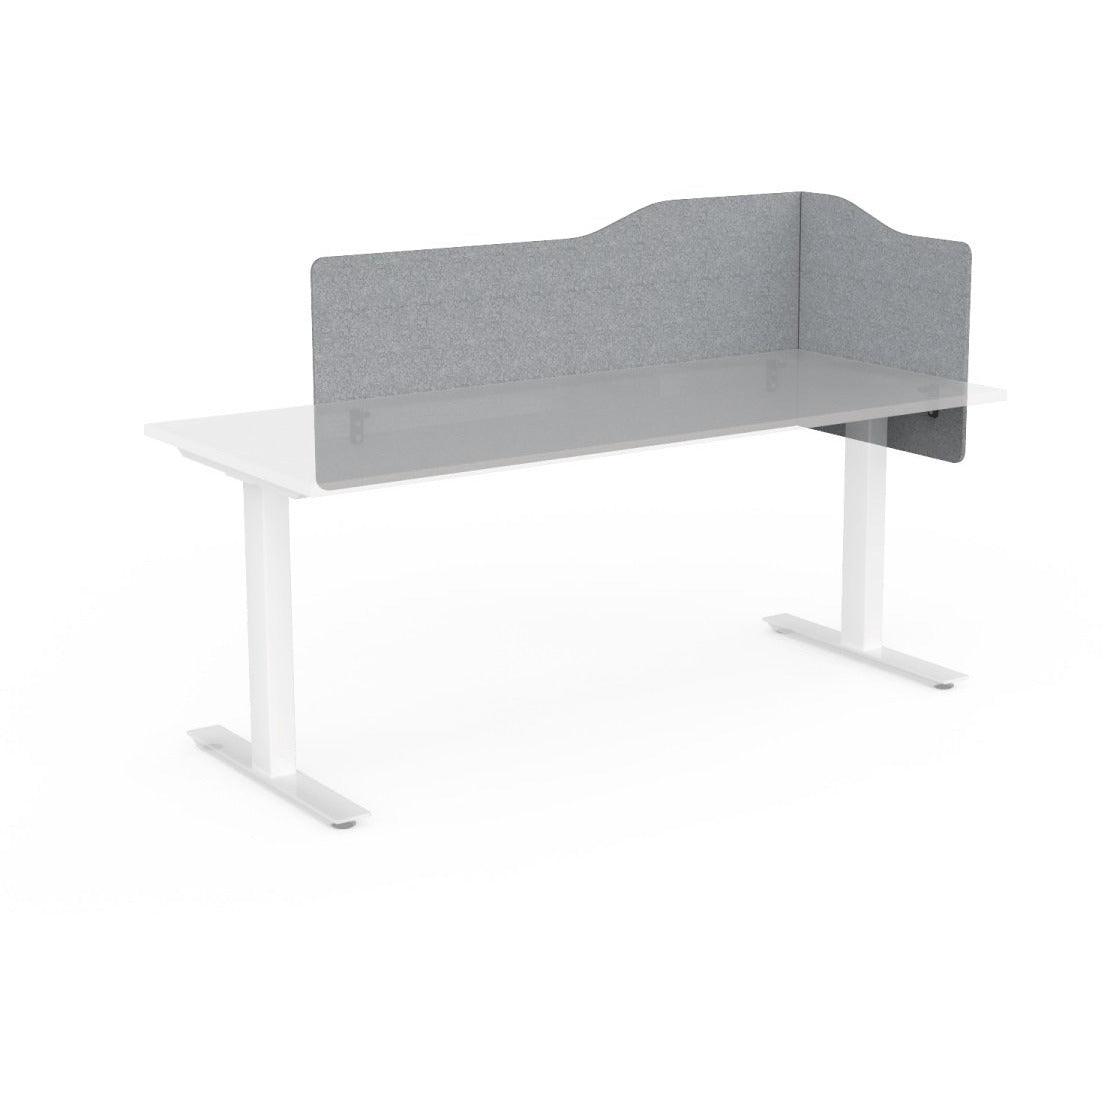 Agile Electric Height Adjustable Desk with E-Panel Screen on RHS - Office Furniture Company 